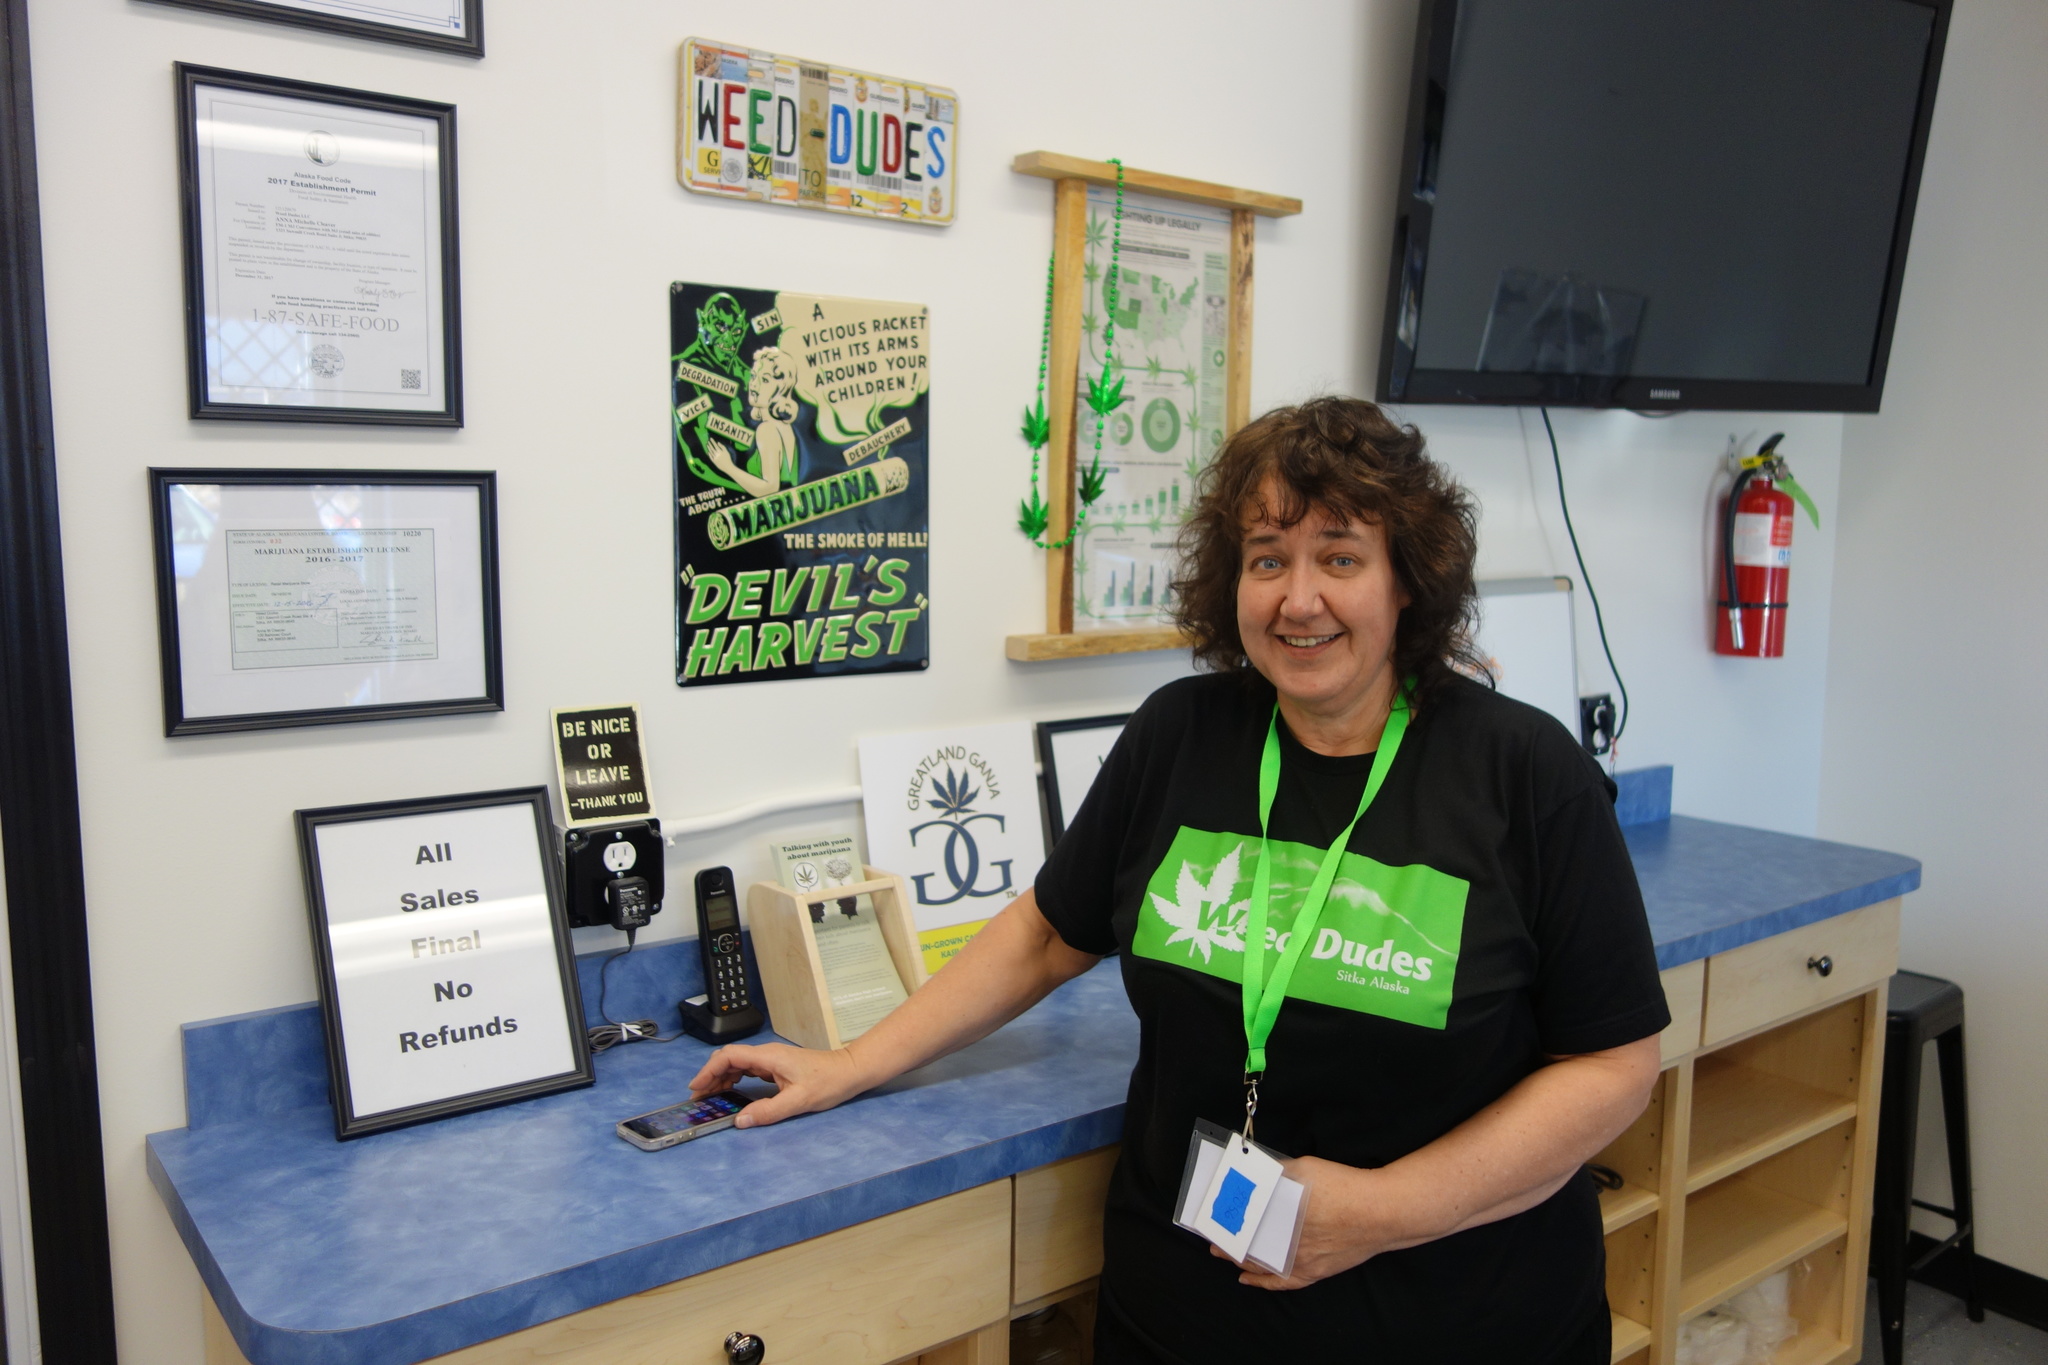 Michelle Cleaver stands behind the counter at Weed Dudes, the new pot shop in Sitka.